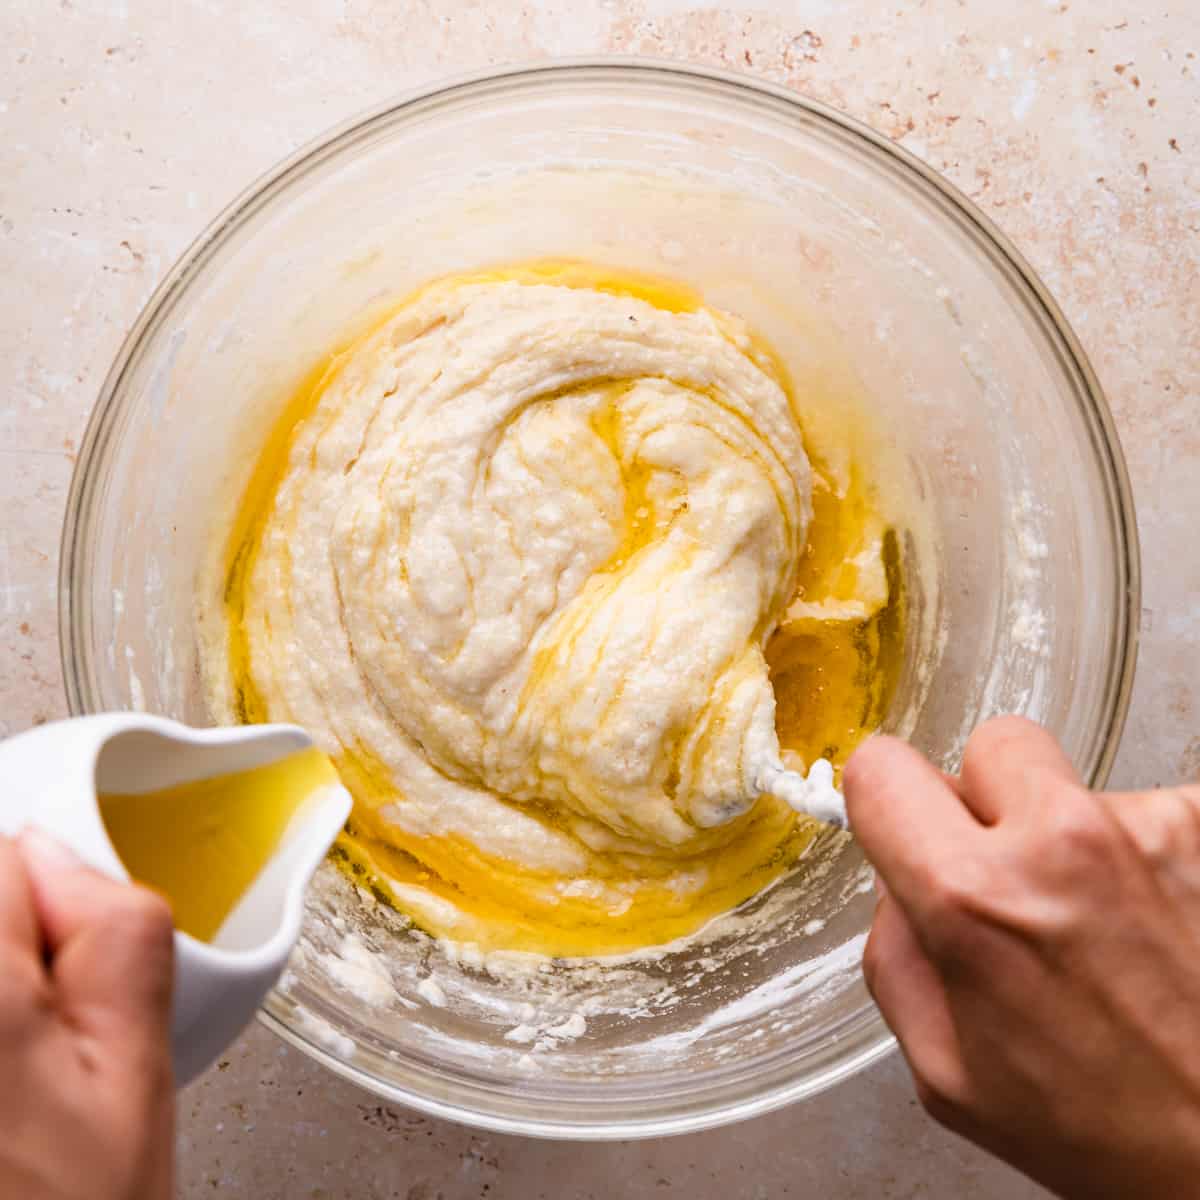 melted butter being added into cake batter in a large glass bowl.